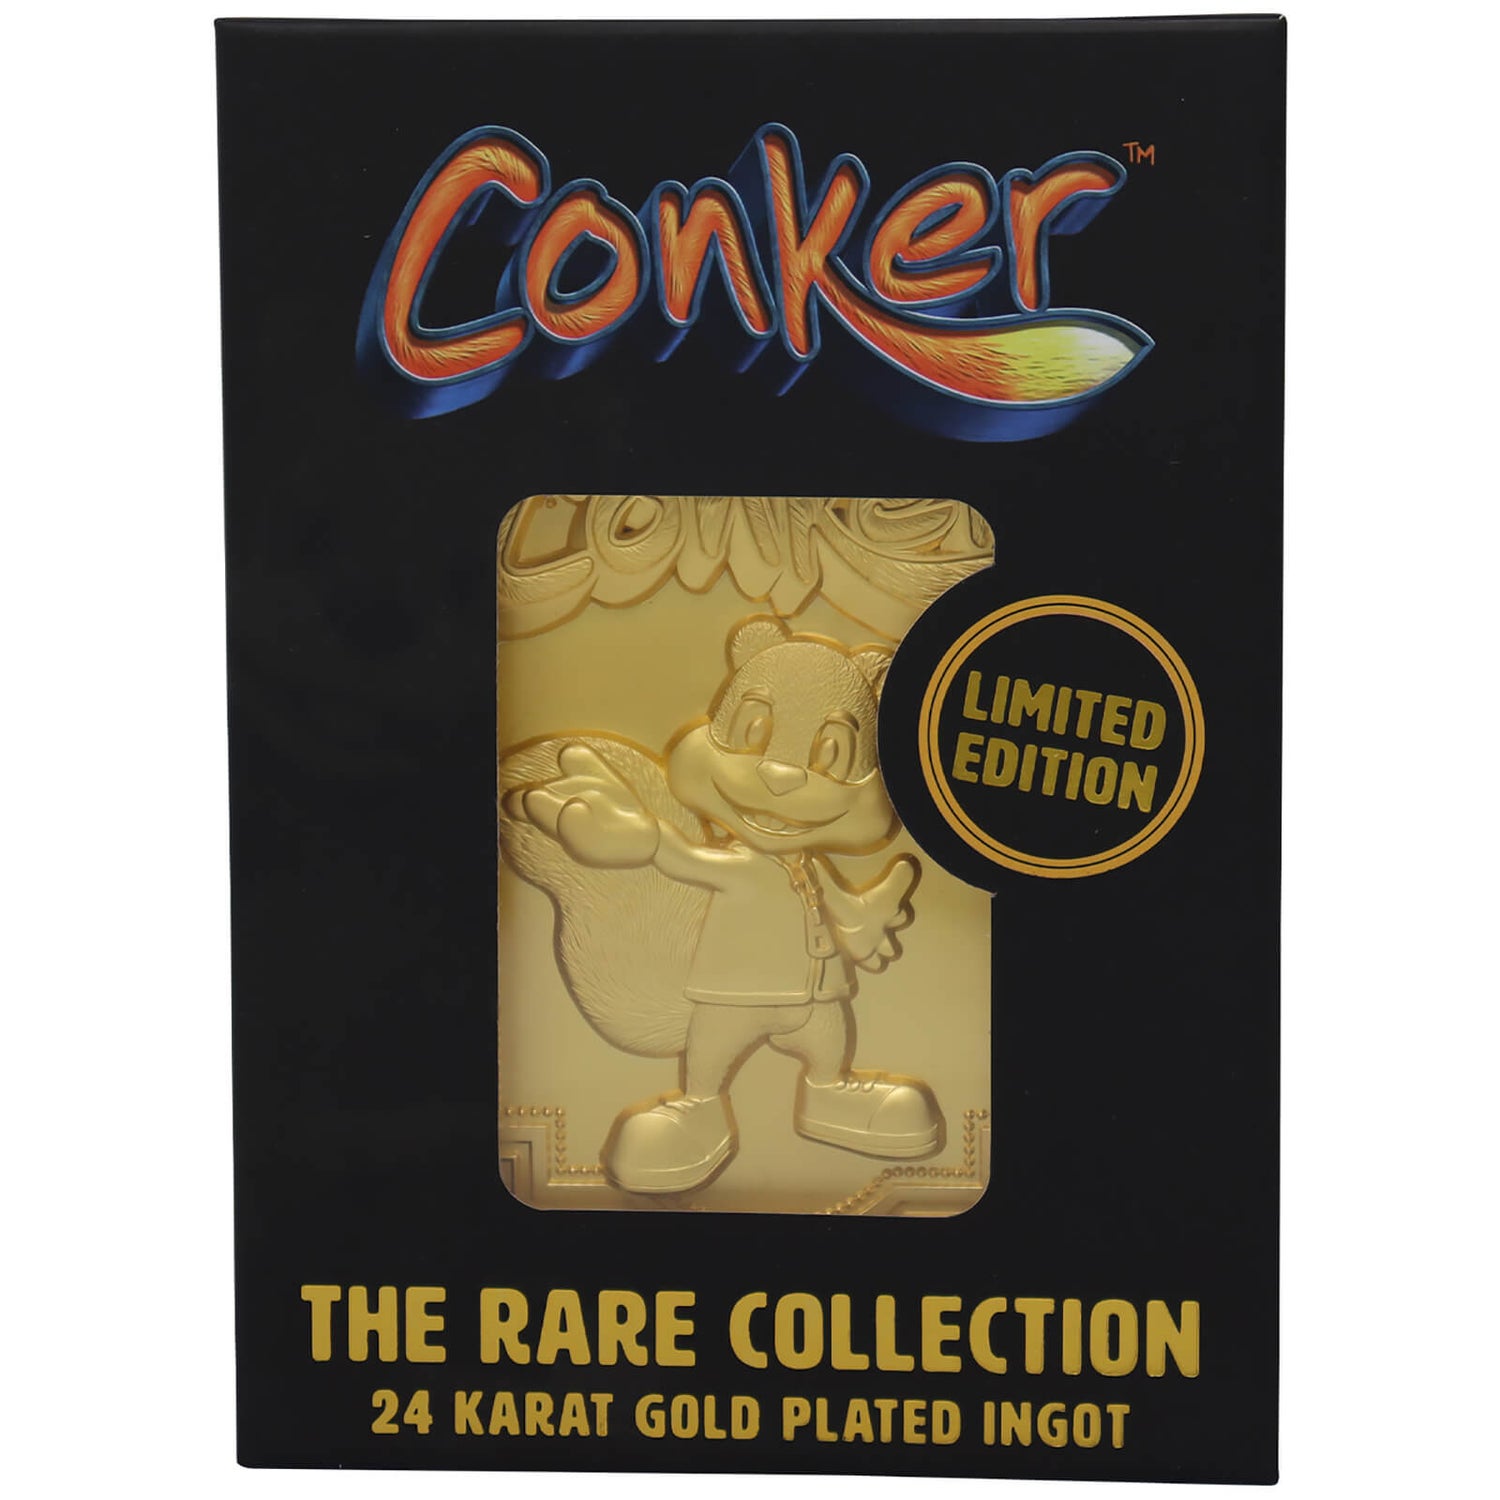 The Rare Collection - Conker 24k Gold Plated Ingot